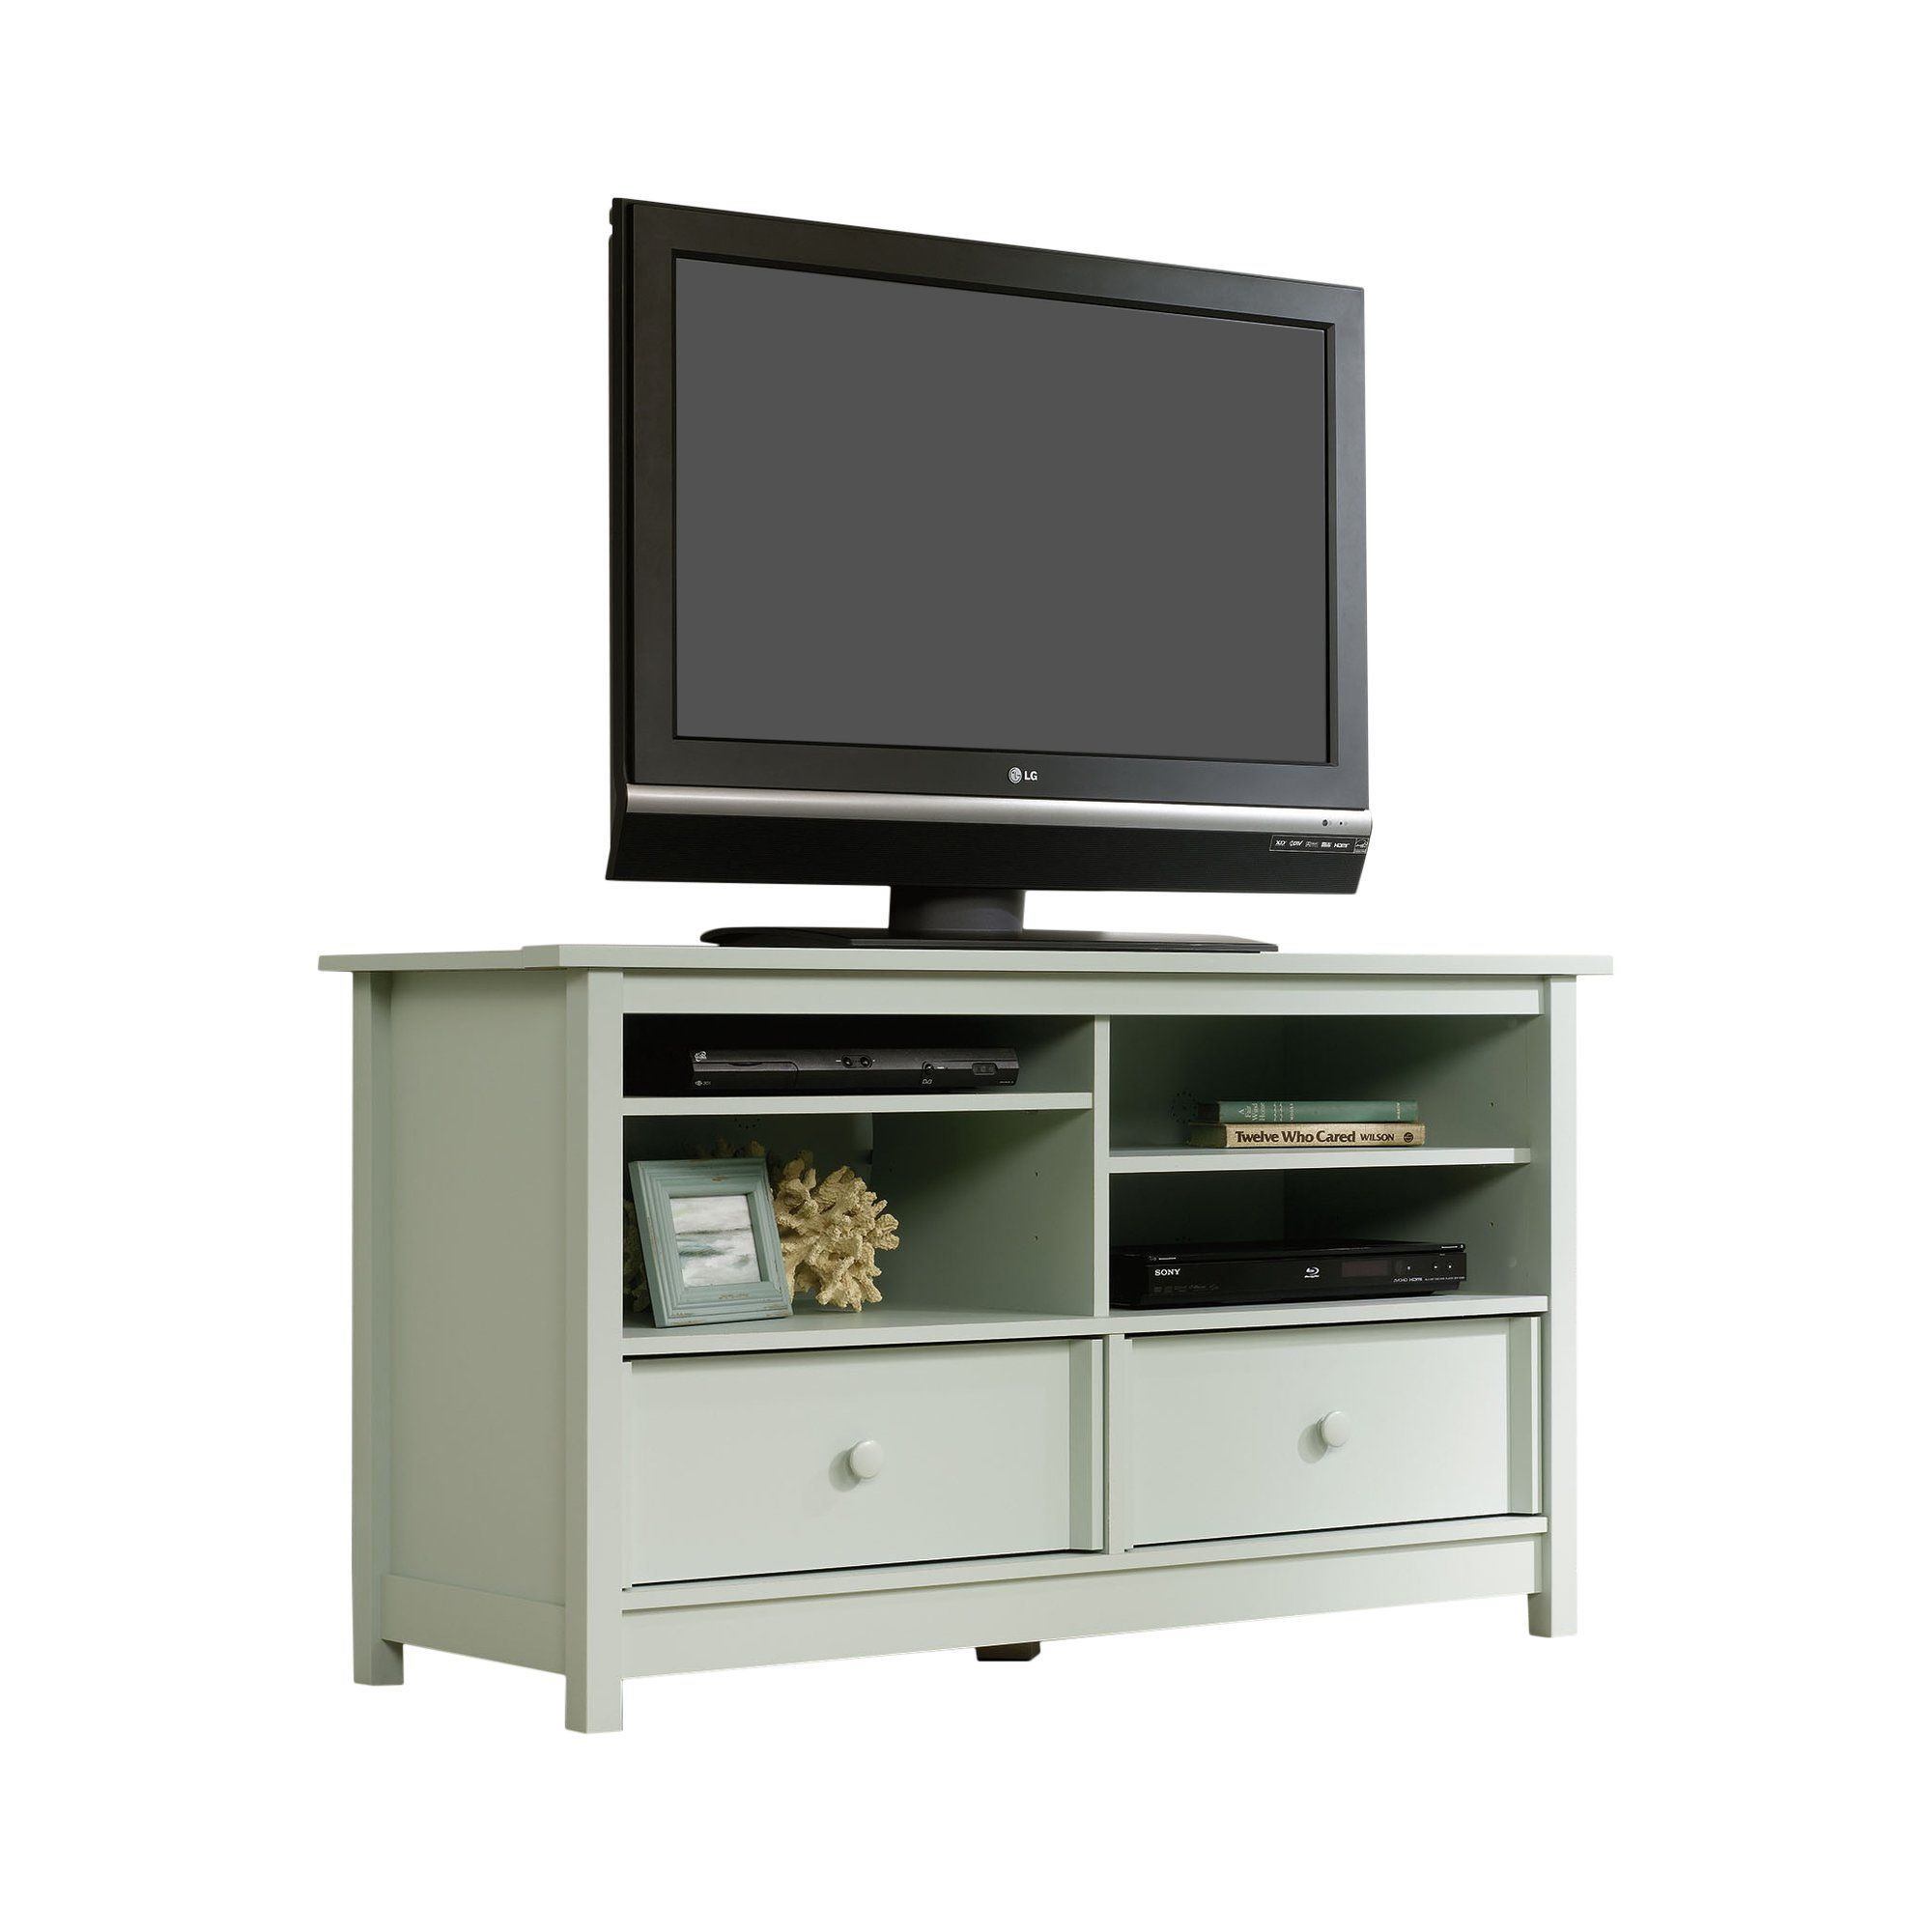 Customer Image Zoomed | Cool Tv Stands, Entertainment Intended For Funky Tv Stands (View 5 of 15)